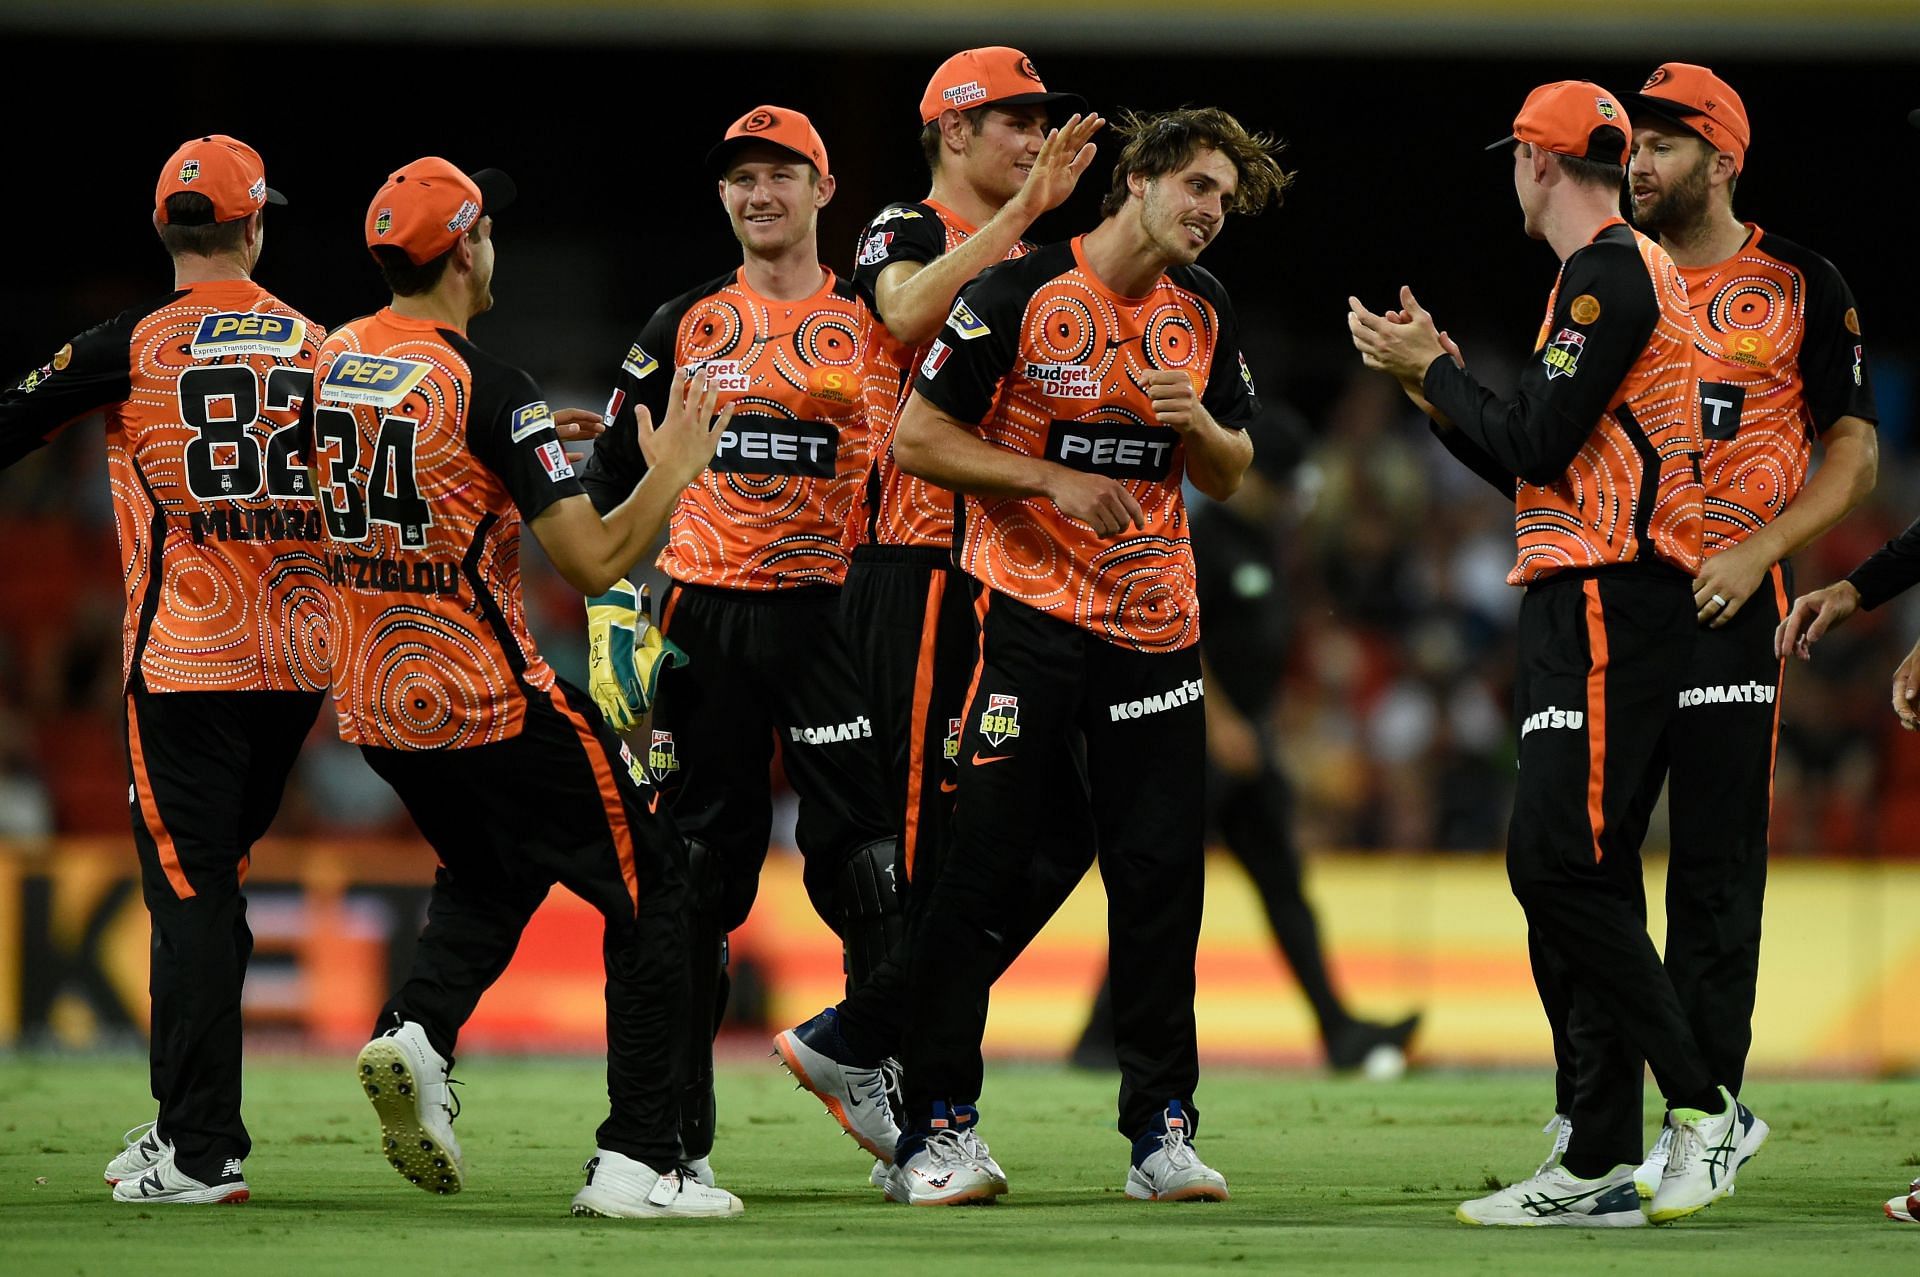 The Scorchers celebrating the fall of a wicket.